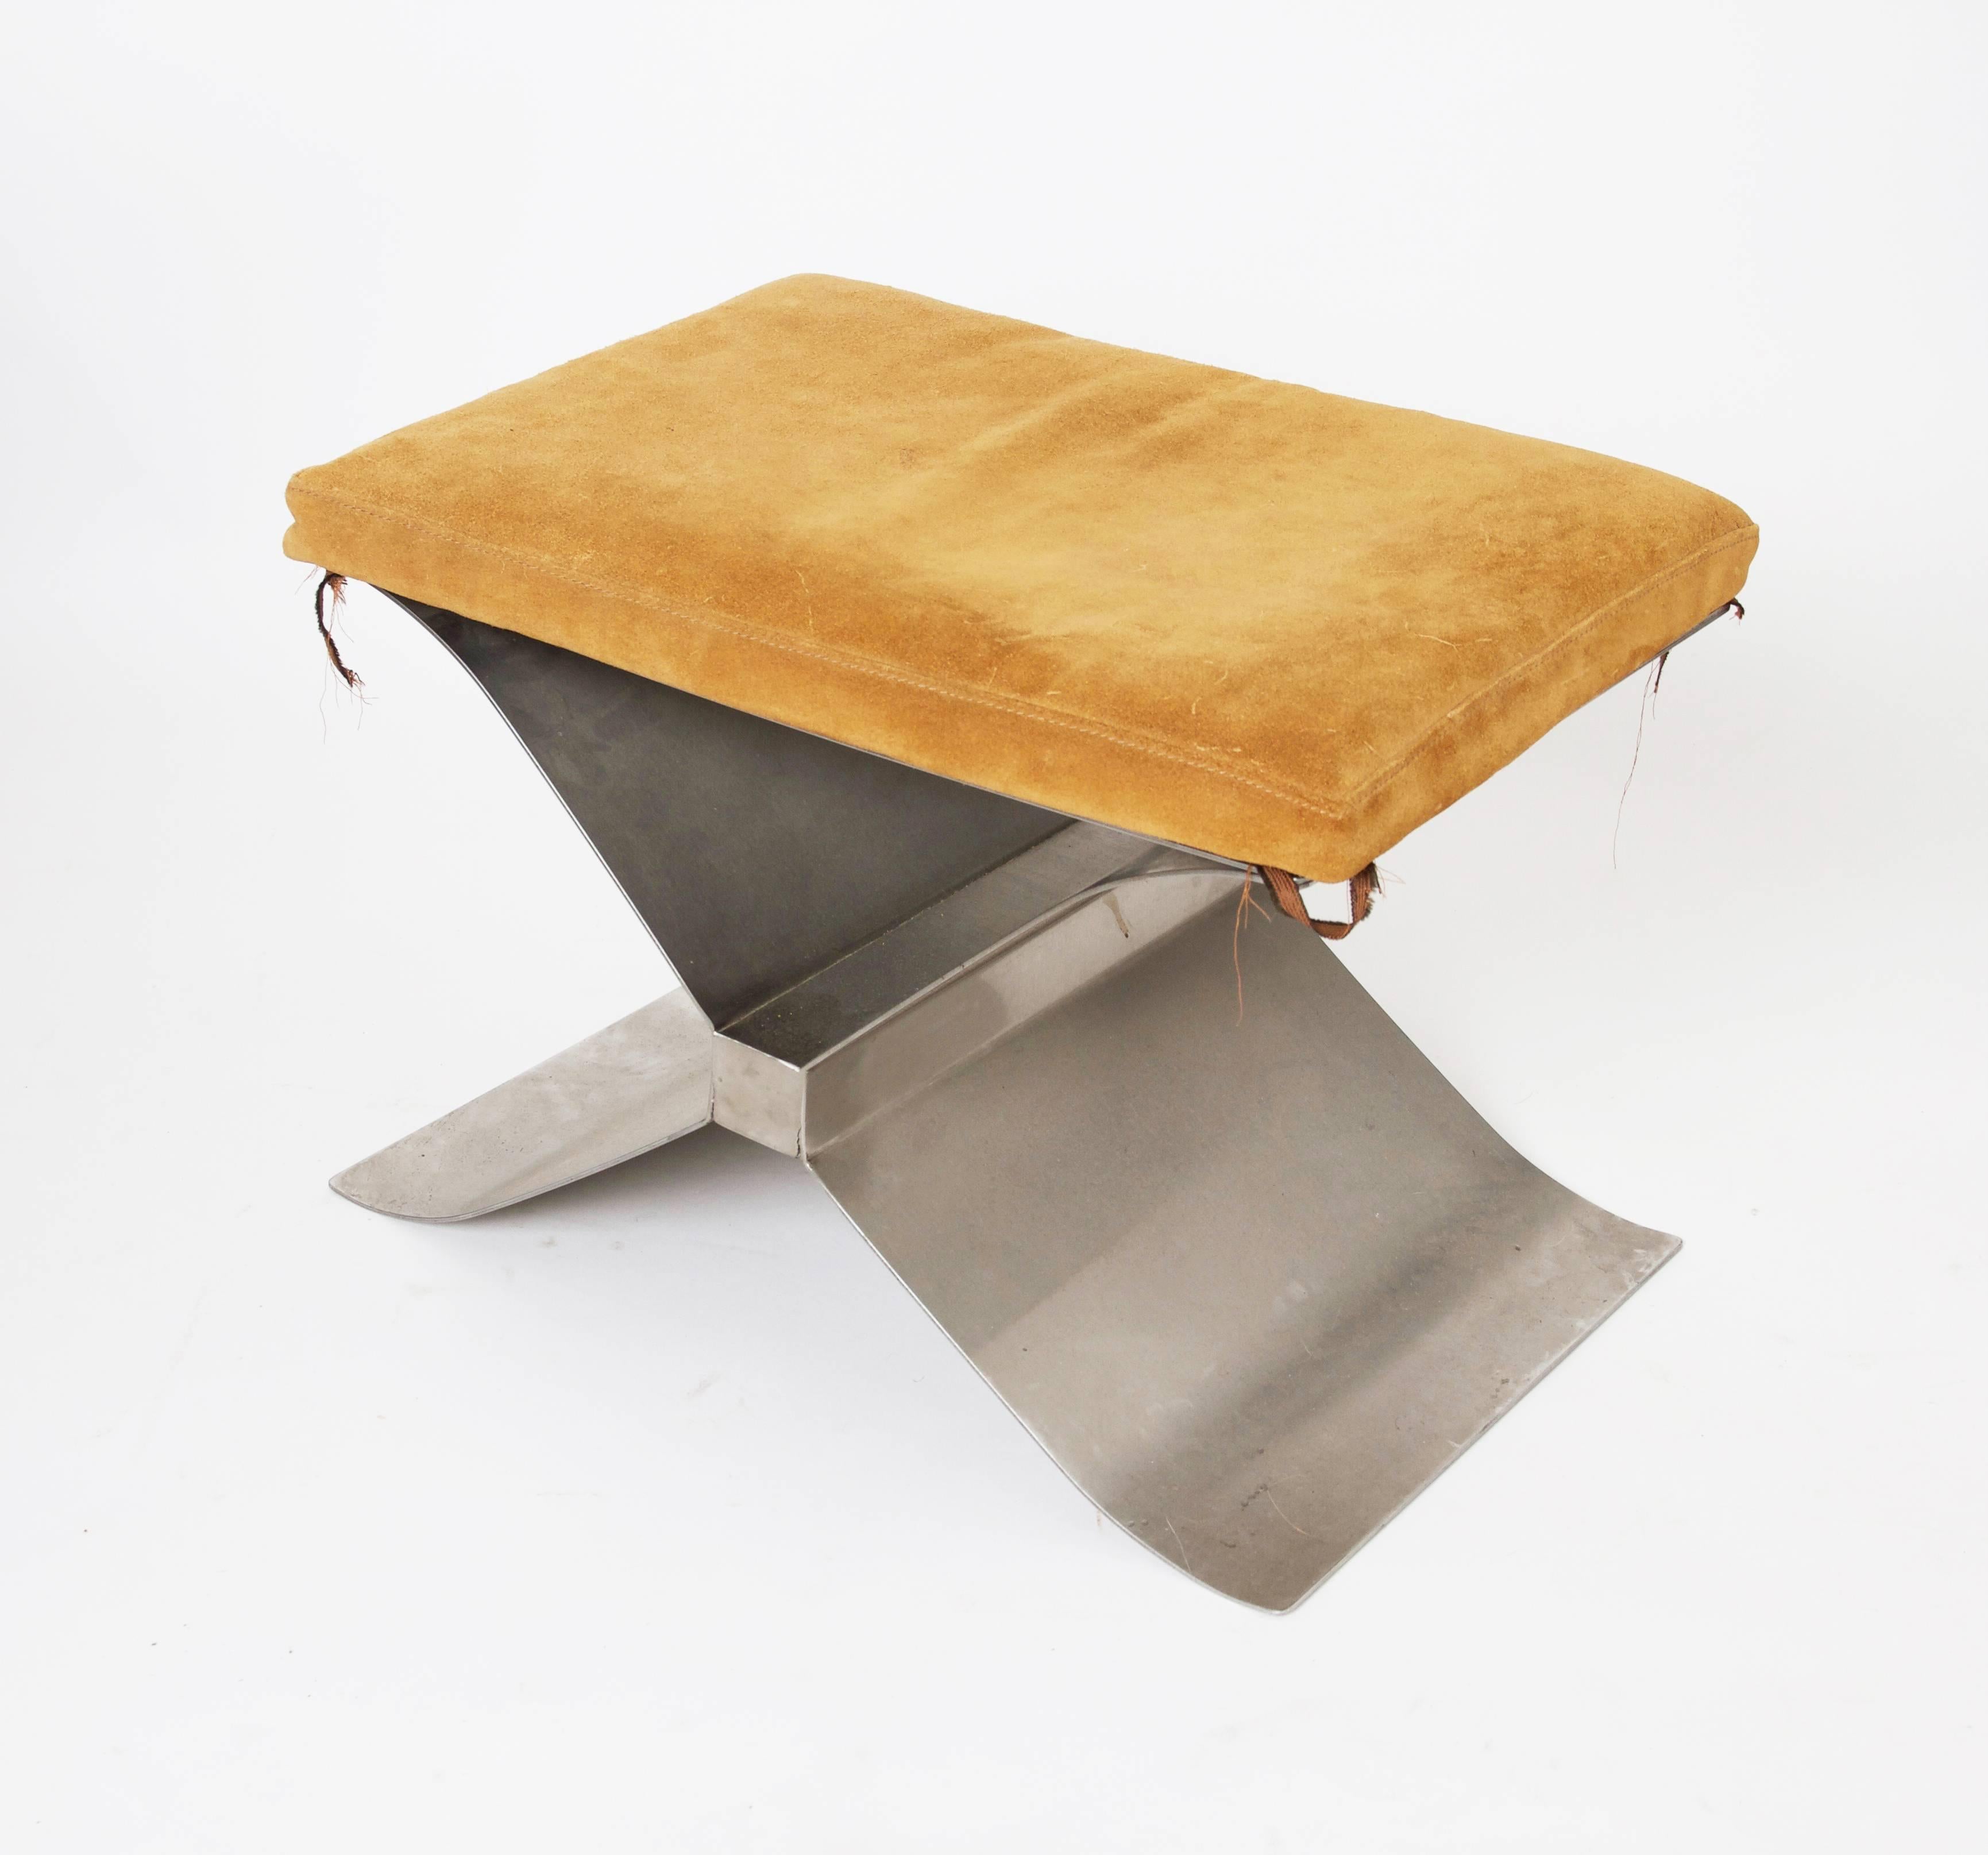 Beautiful stainless steel X-leg stool designed by François Monnet and edited by Kappa in the 1970s.
It comes with light brown suede seats.
Strong drawing by the French designer F. Monnet.
Good original condition with minor structural damage